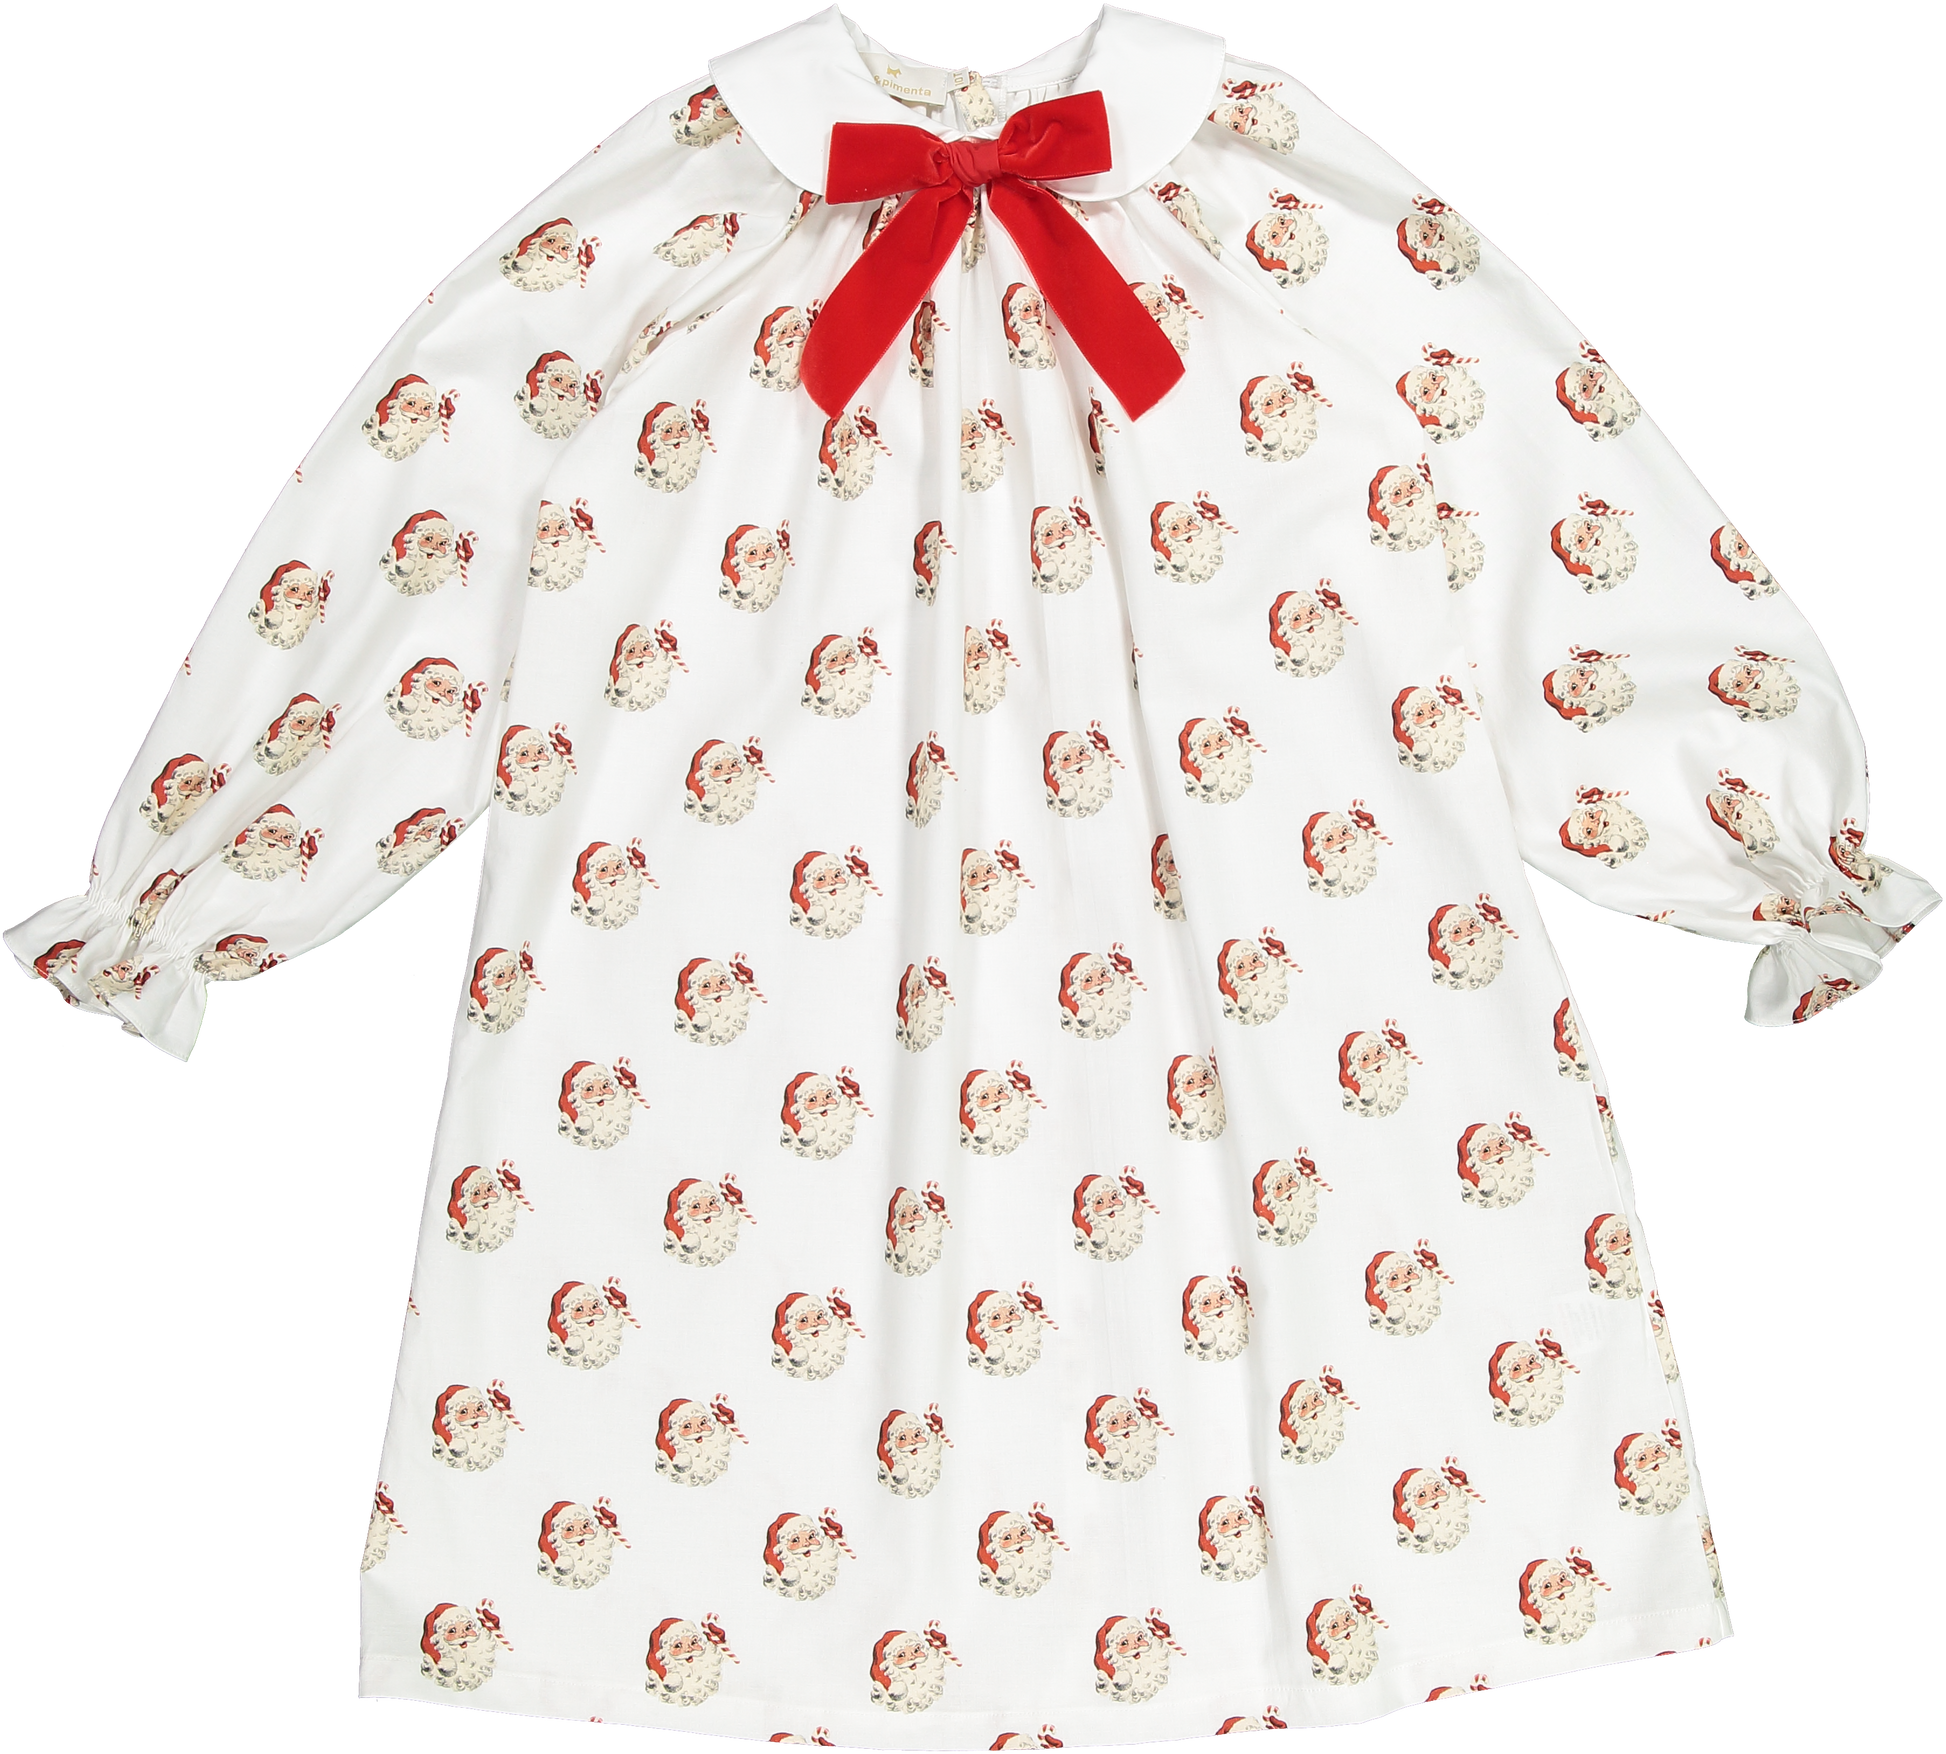 Classic Santa girls nightgown with velvet bow on the peter pan collar. Girls Christmas nightgown. 